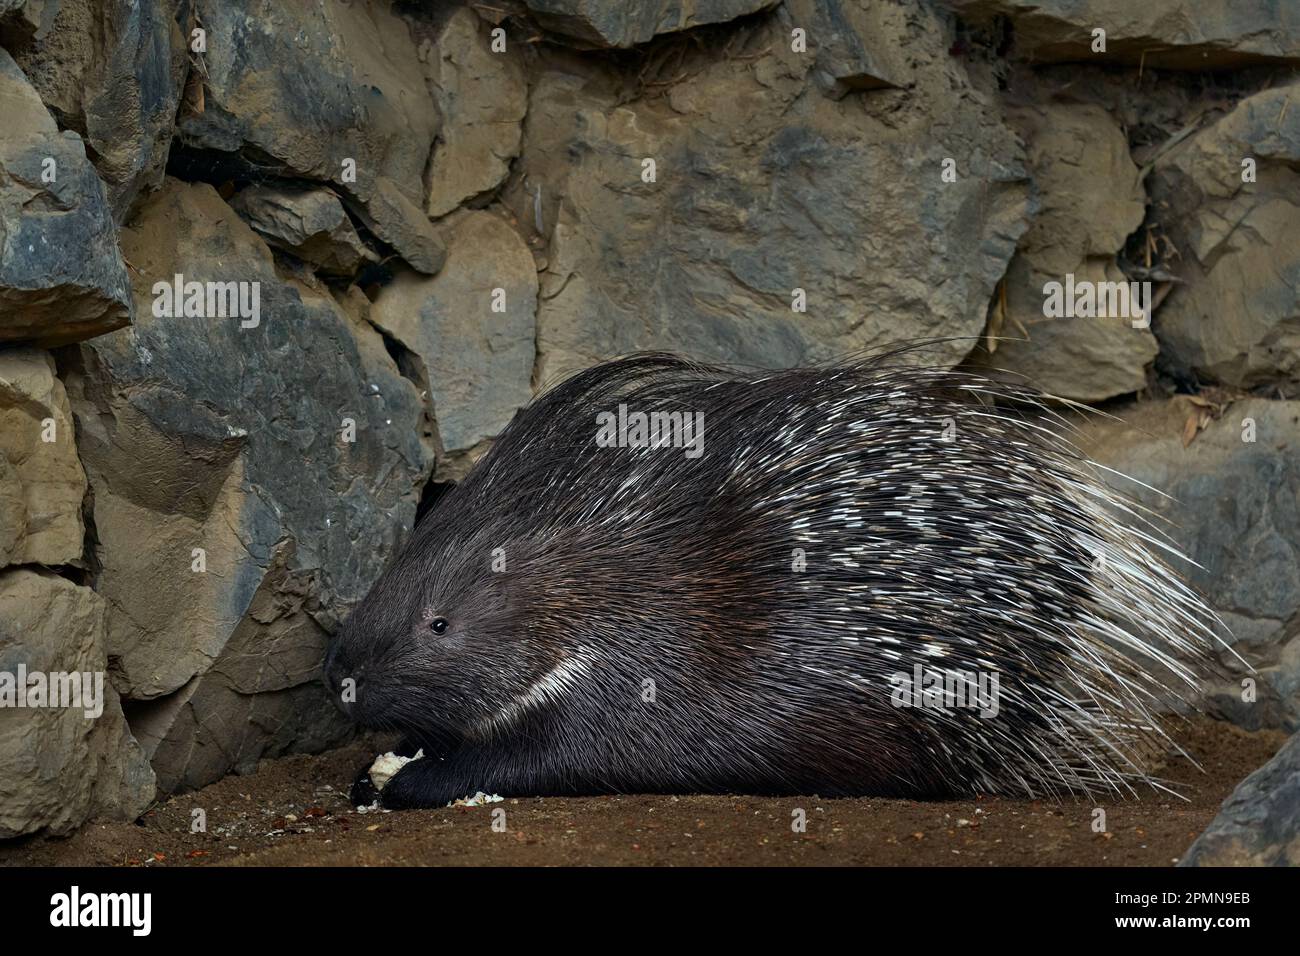 Crested porcupime, Hystrix indica, in the nature rock habitat. cute animal in nature, India in Asia. Prickle quill black animal. Cute mammal in nature Stock Photo